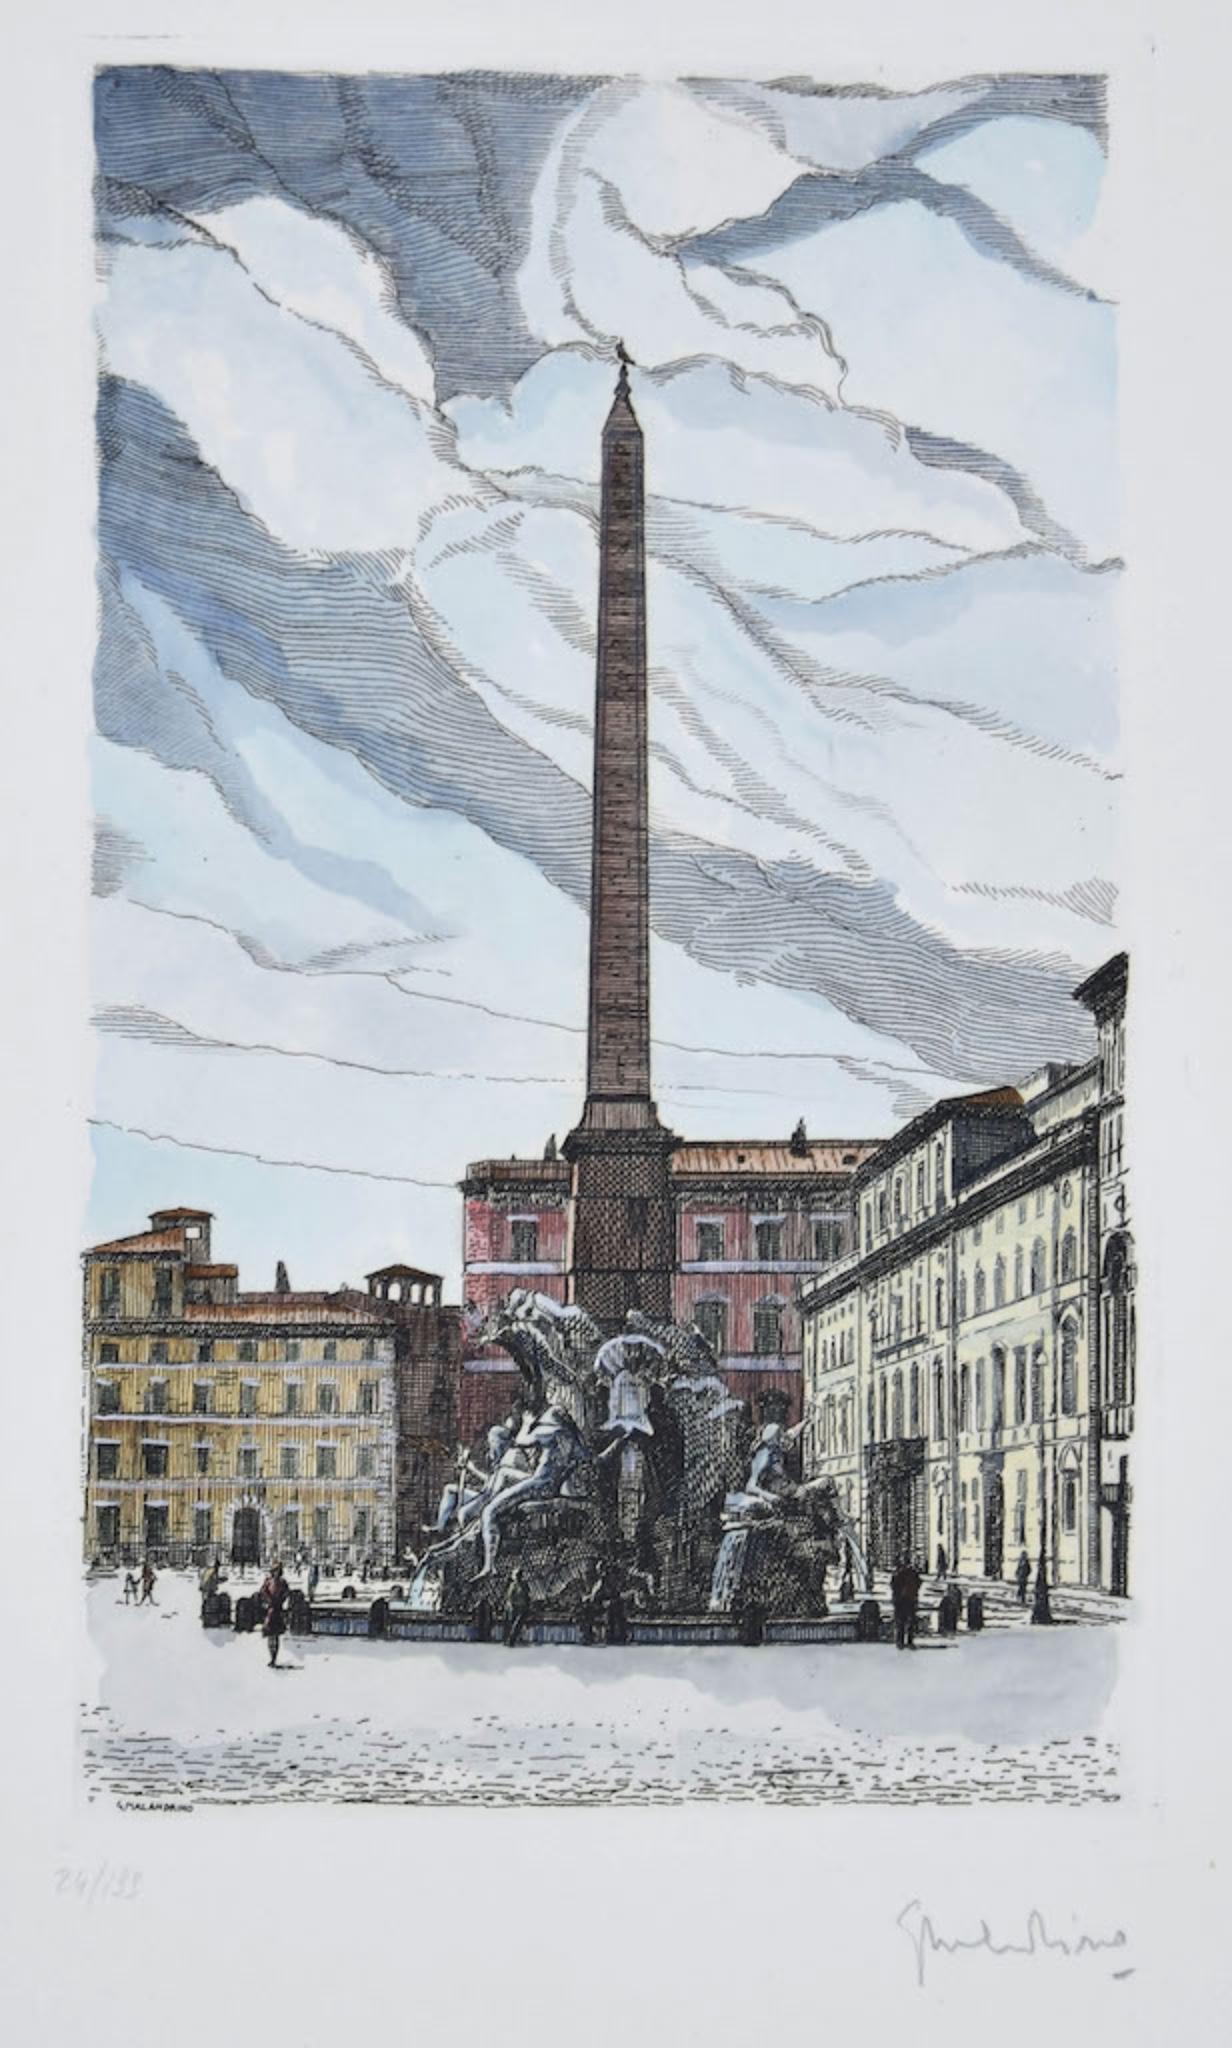 Navona Square - Rome is an original artwork realized by Giuseppe Malandrino.

Original print in etching technique. Image Dimensions: 29 x 18 cm

Hand-signed by the artist in pencil on the lower right corner. Numbered on the lower-left corner.